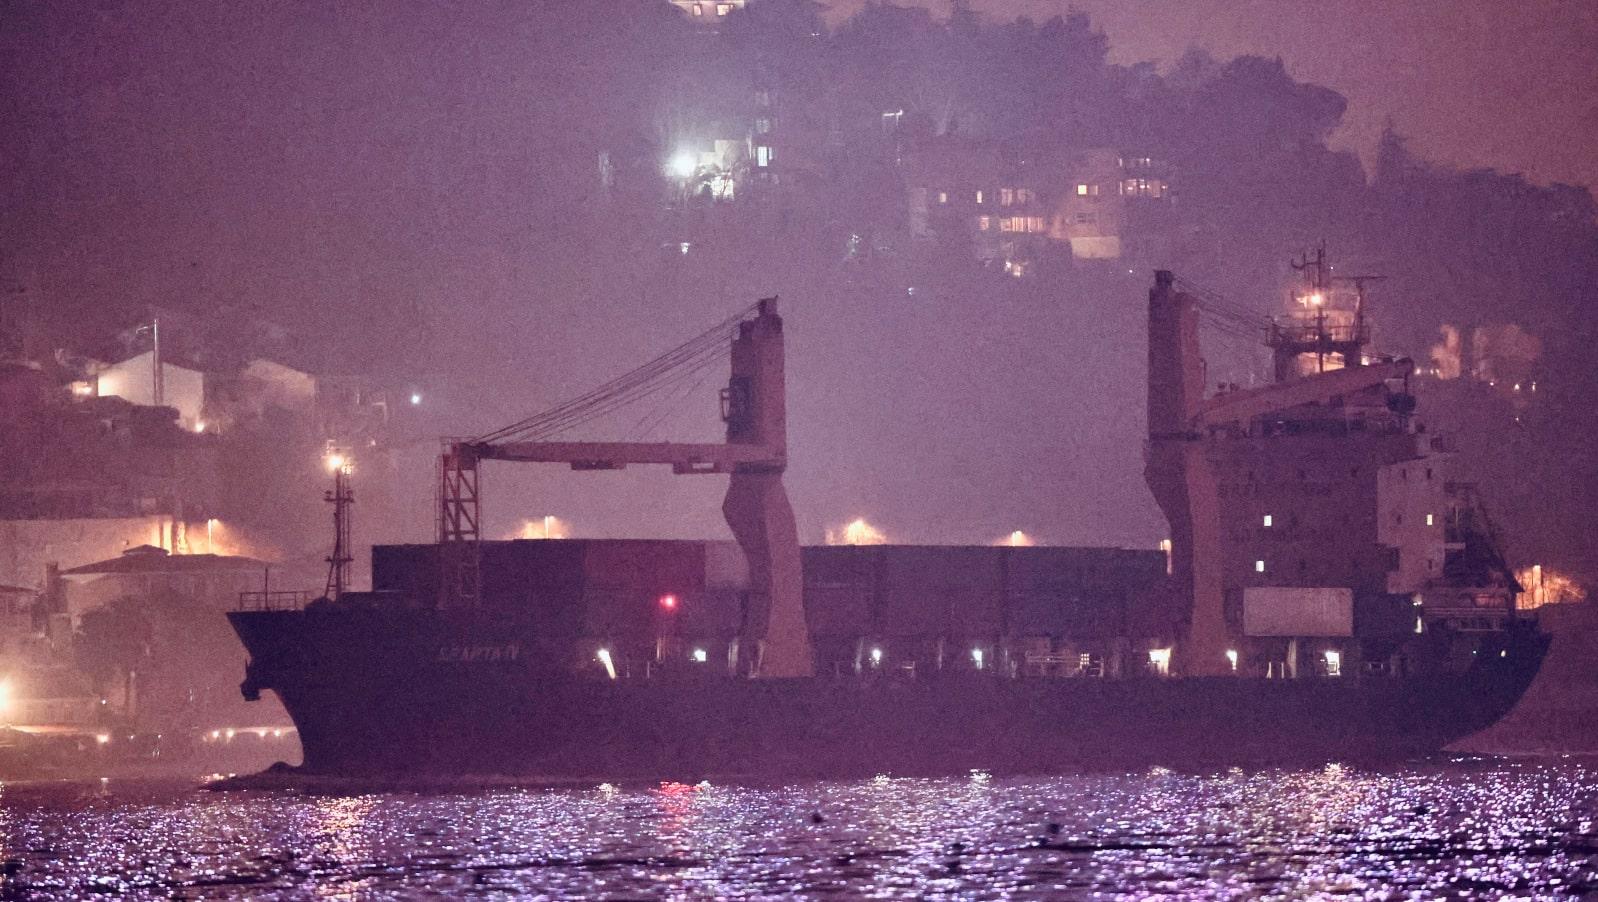 Russia uses merchant ships to transport weapons through the Bosphorus